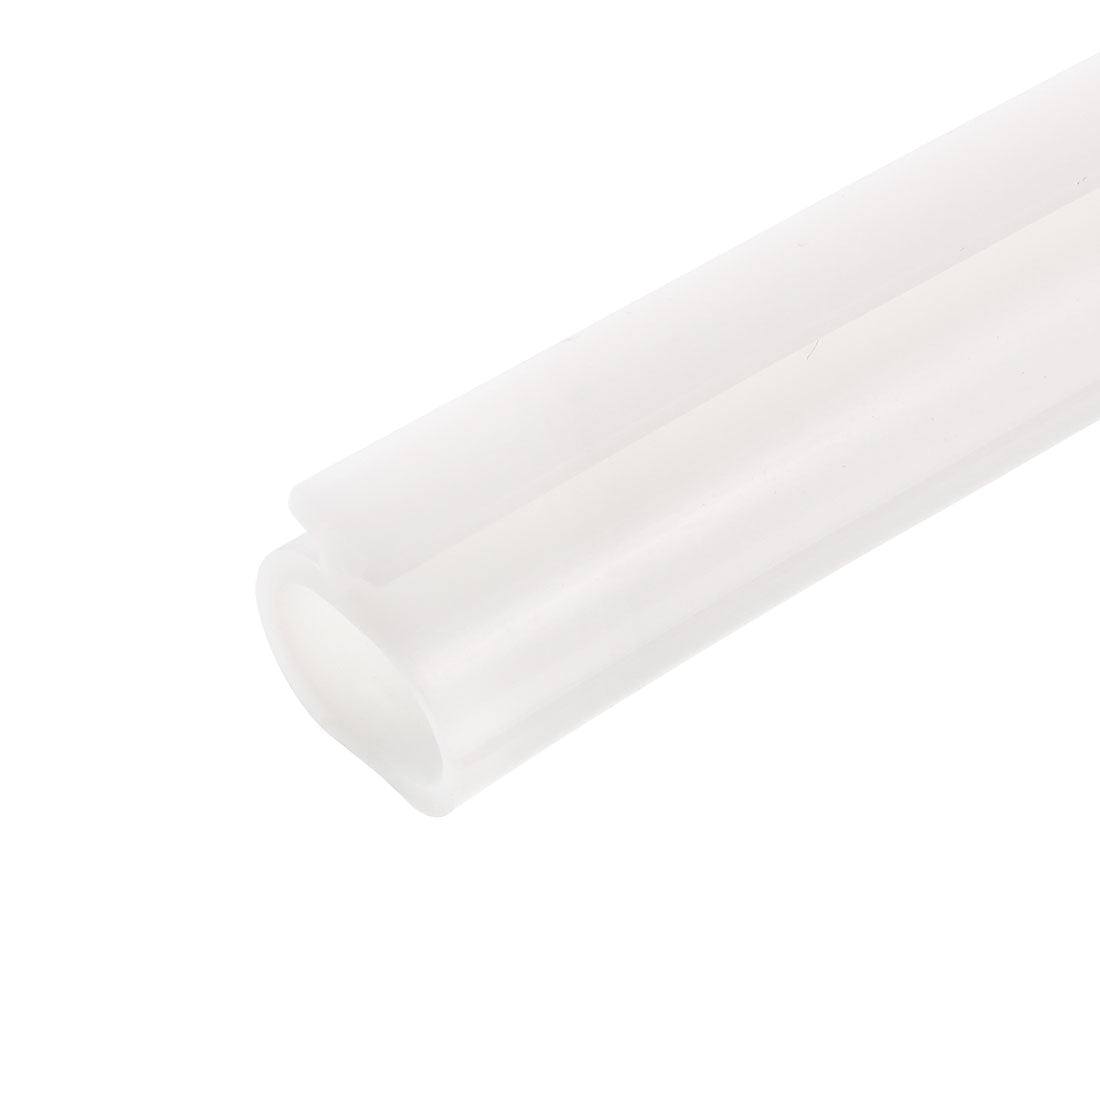 uxcell Uxcell T-Slot Mount Weatherstrip Seal 9mm Bulb Bubble for 5mm Slot 1 Meter White